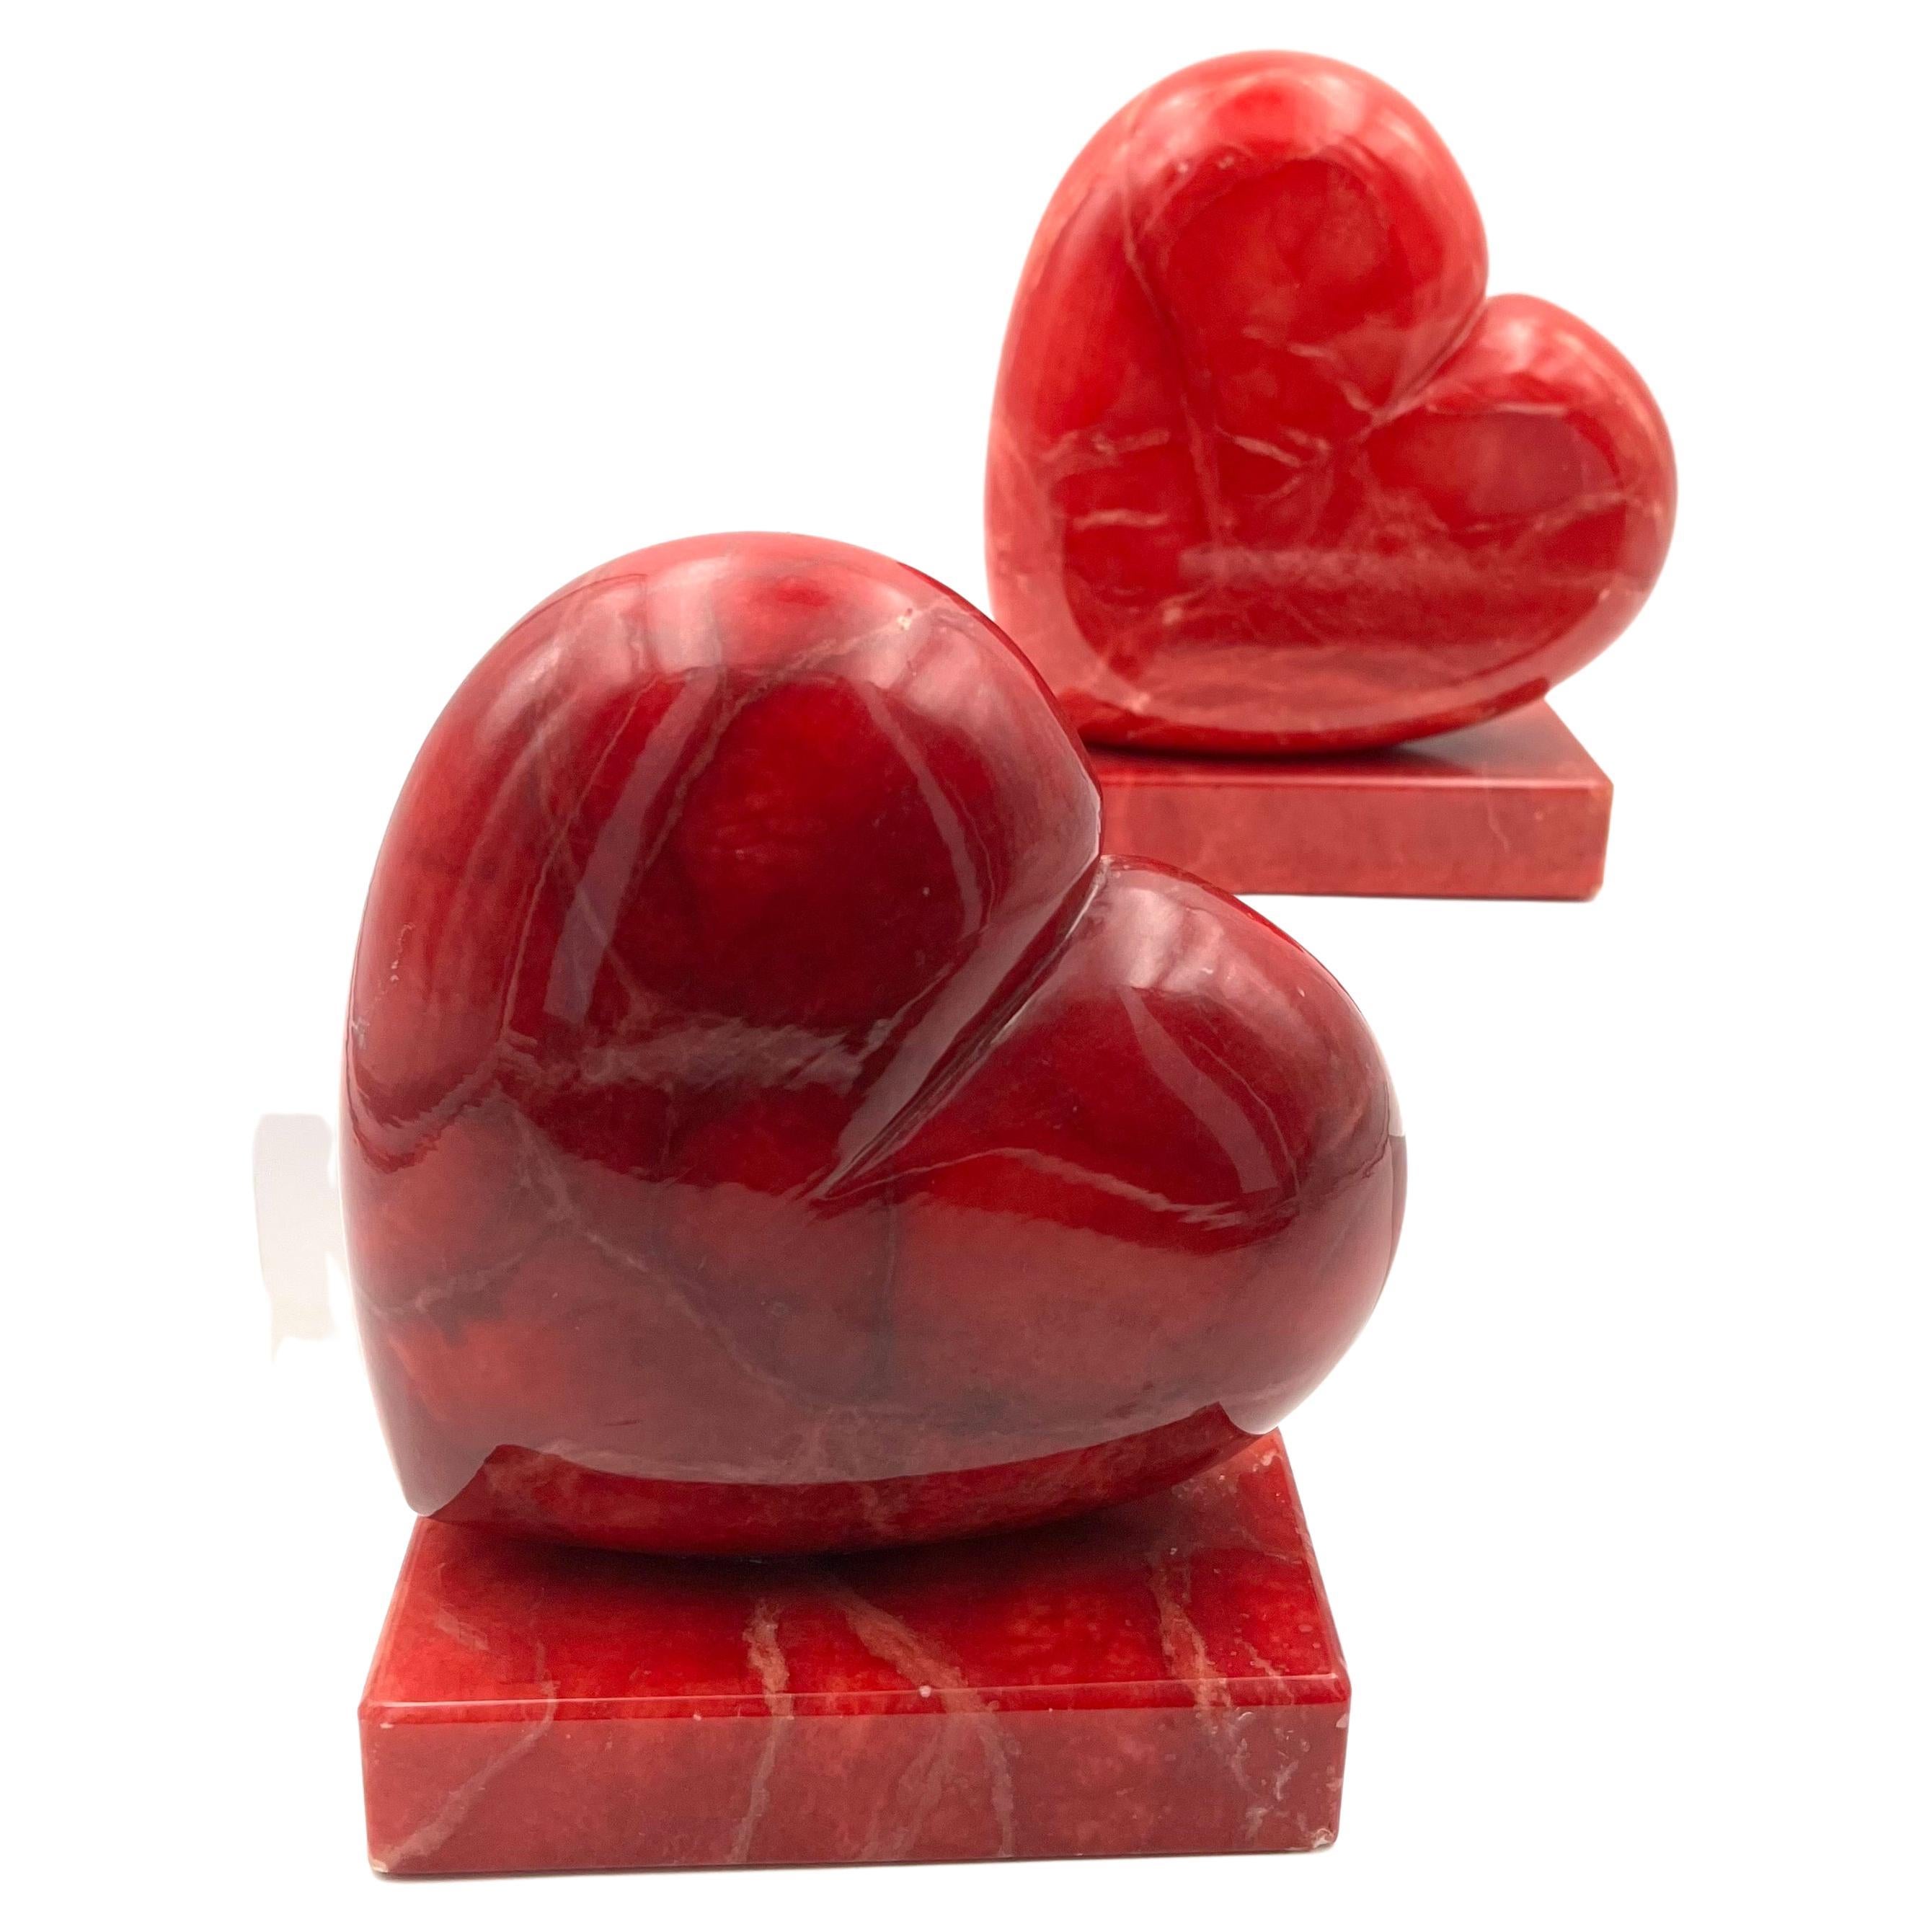 Cool pair of solid hand-carved red hearts, bookends circa the 1980s made in Italy beautiful color.